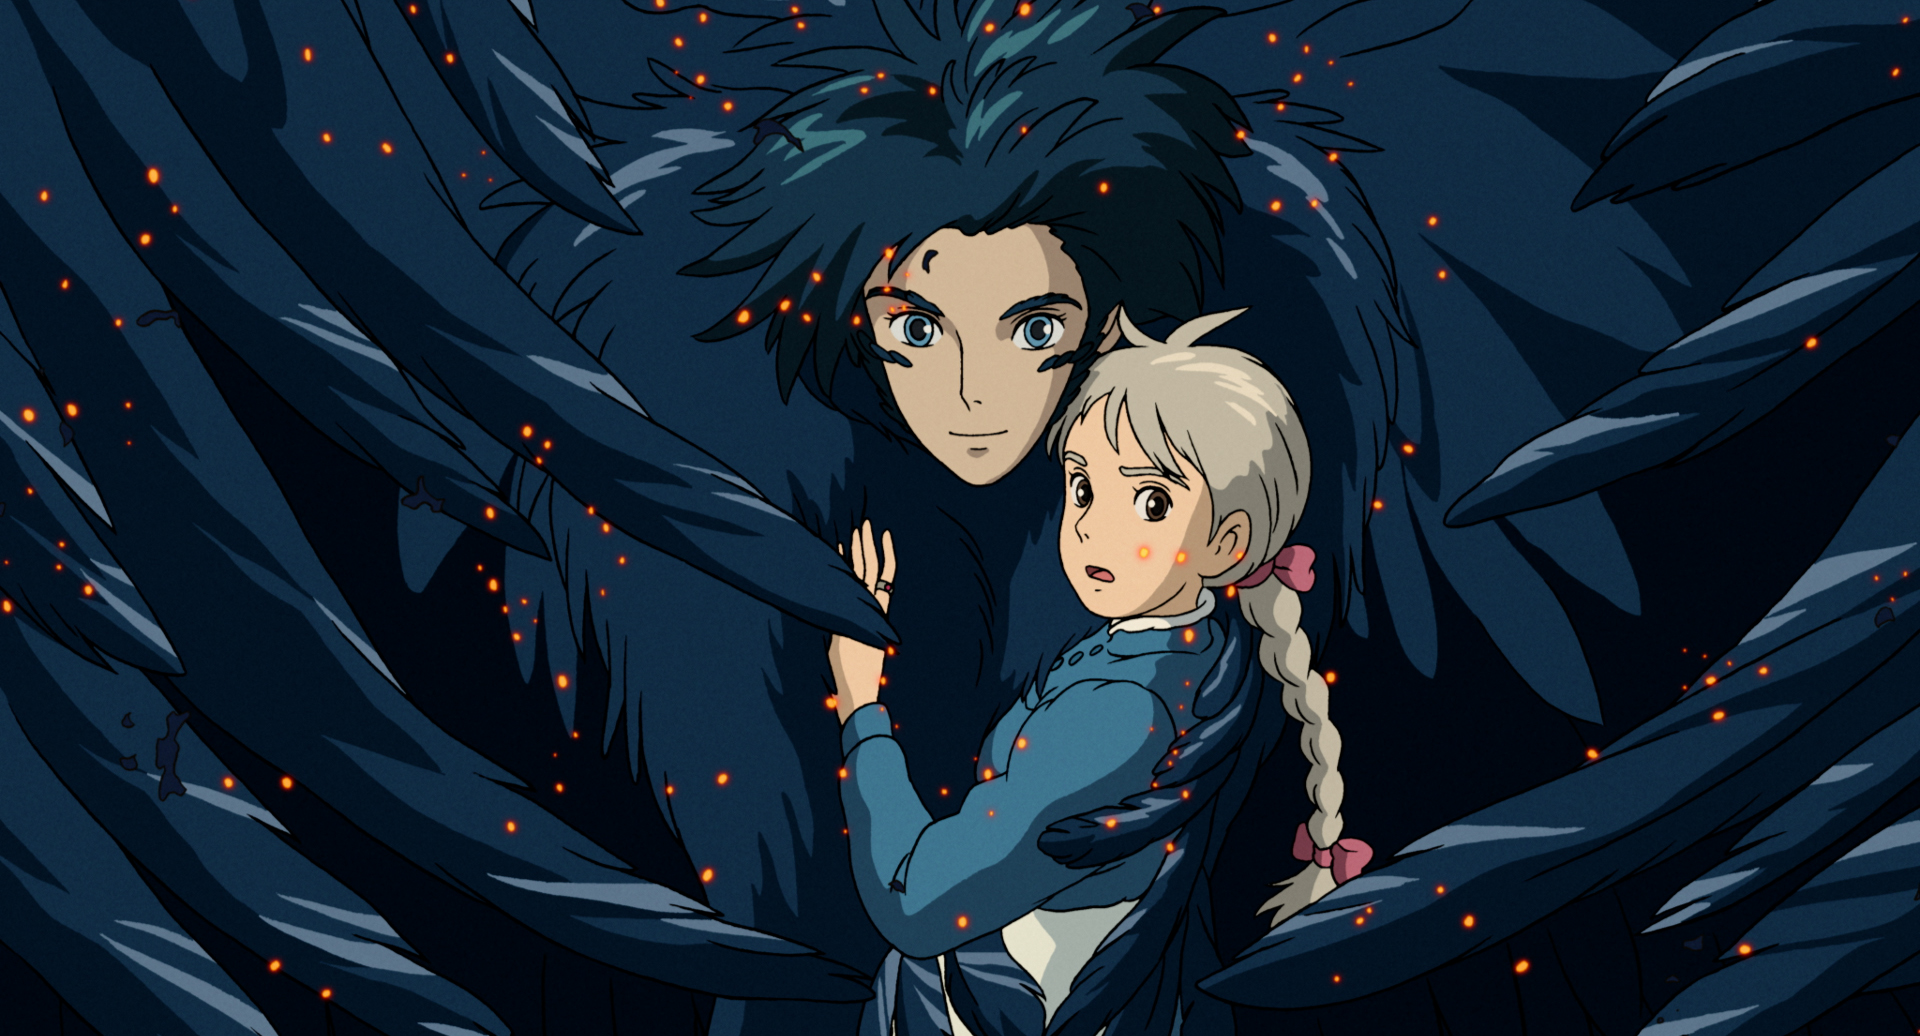 Studio Ghibli Films To Be Available for Digital Purchase For First Time   IndieWire